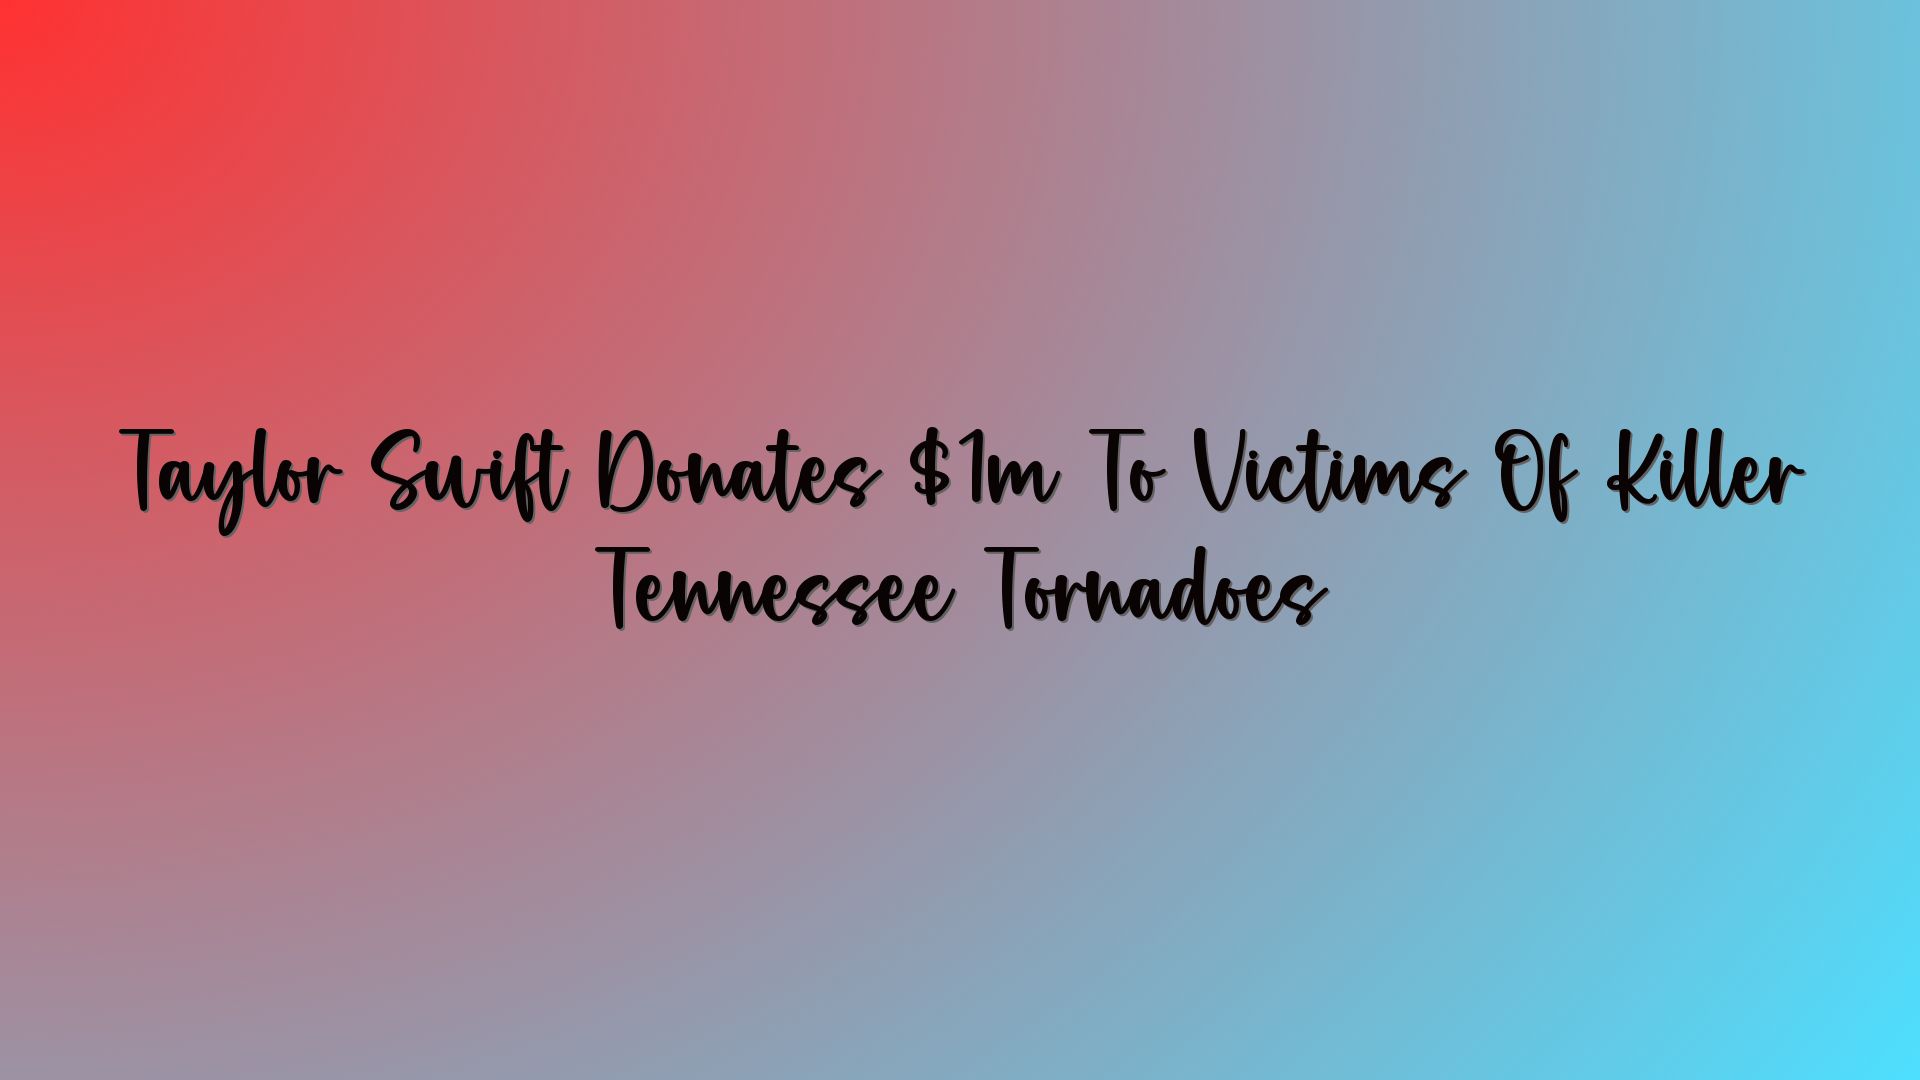 Taylor Swift Donates $1m To Victims Of Killer Tennessee Tornadoes